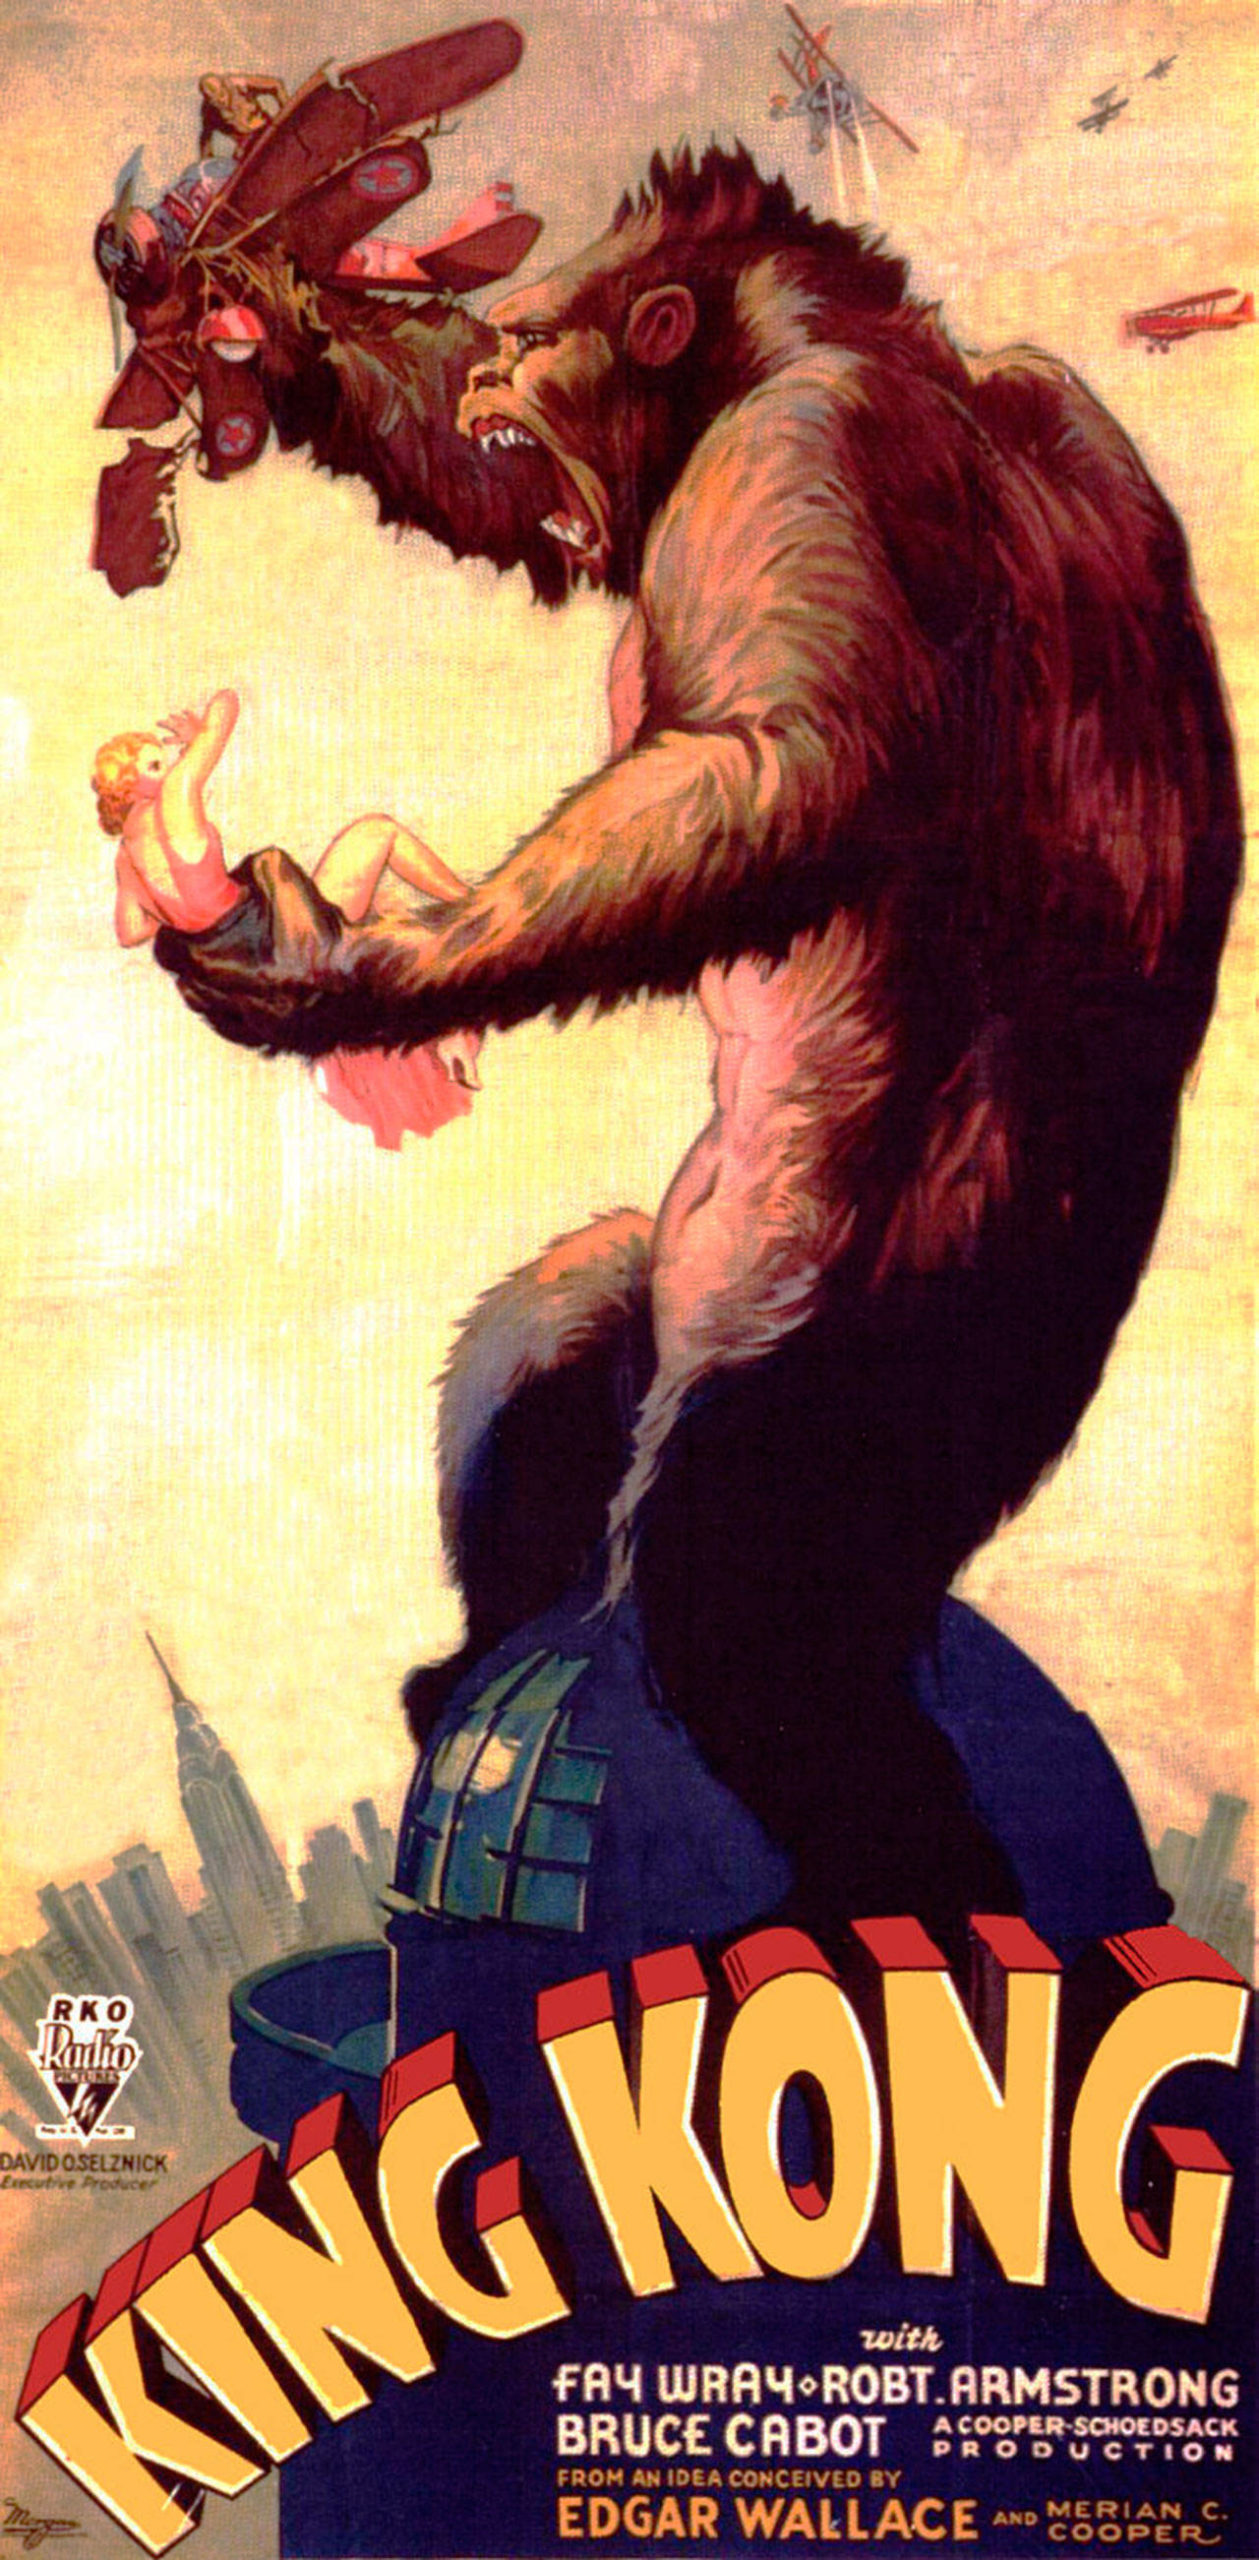 Image courtesy of Radio Pictures | An original theatrical release poster for “King Kong” (1933), which returns to the big screen at Bainbridge Cinemas at 1 p.m. Friday, March 15 for a special revival screening.